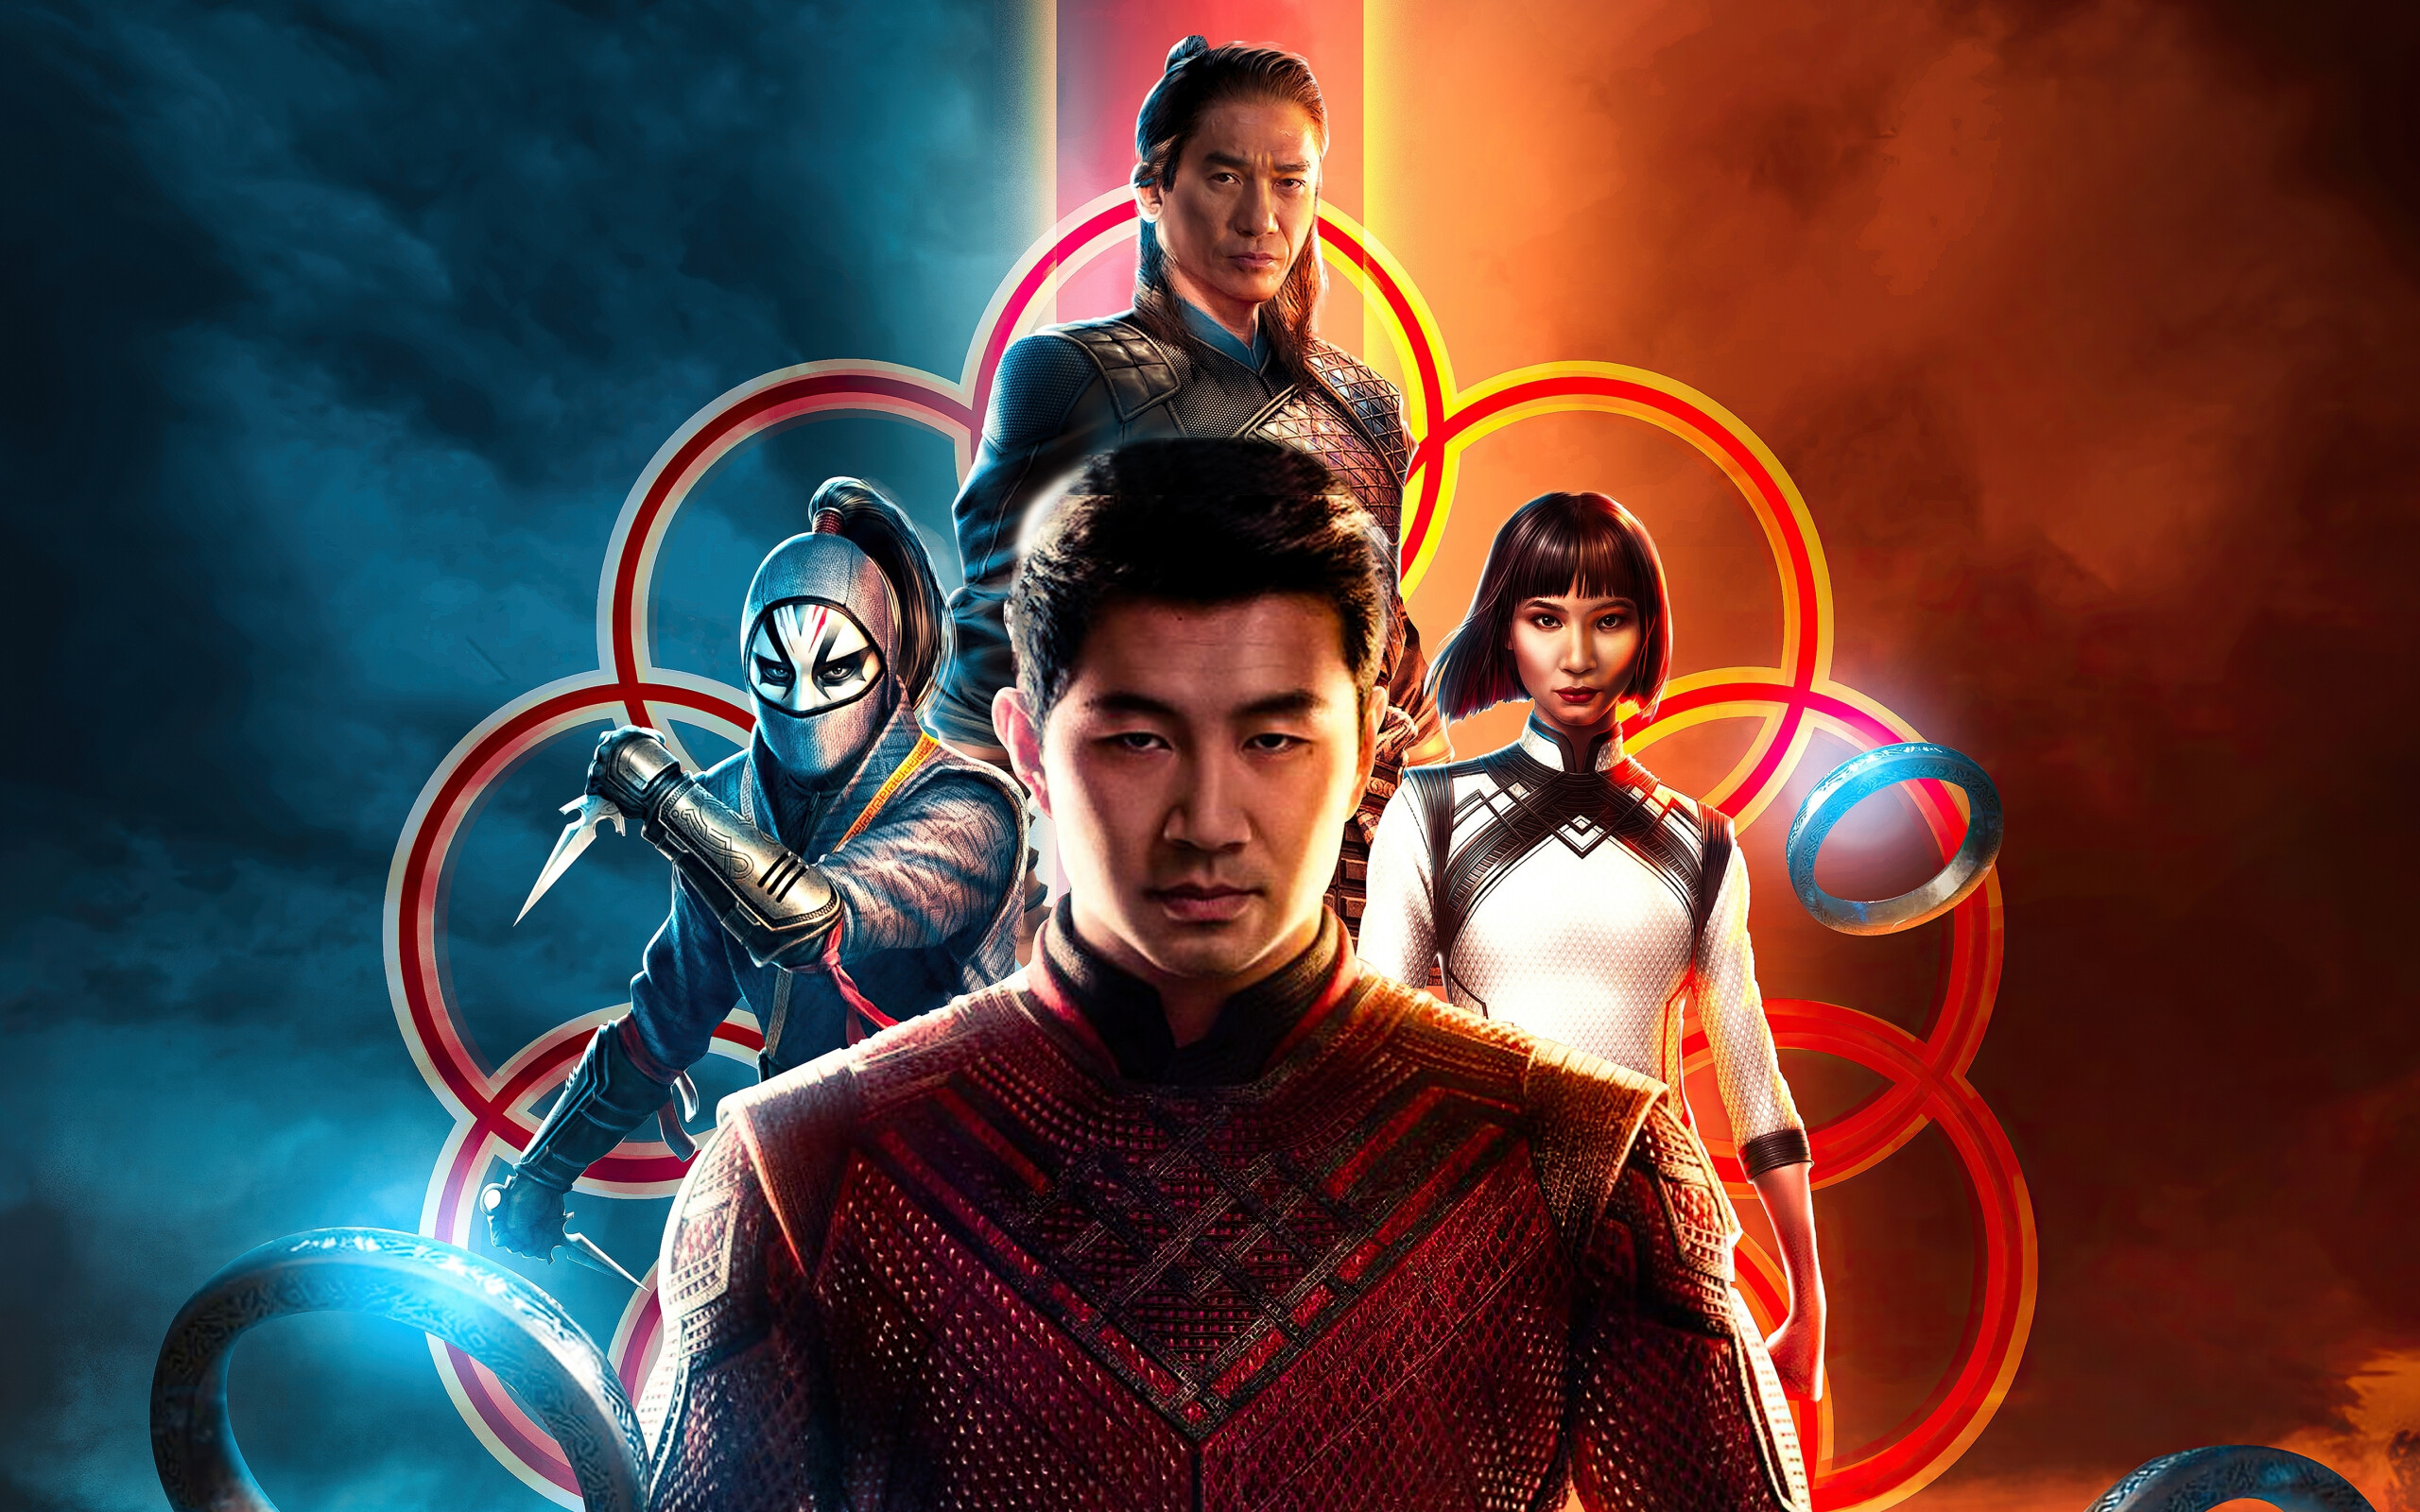 Shang-Chi and the Legend of the Ten Rings: The film received numerous awards and nominations, including a nomination for Best Visual Effects at the 94th Academy Awards. 2560x1600 HD Wallpaper.